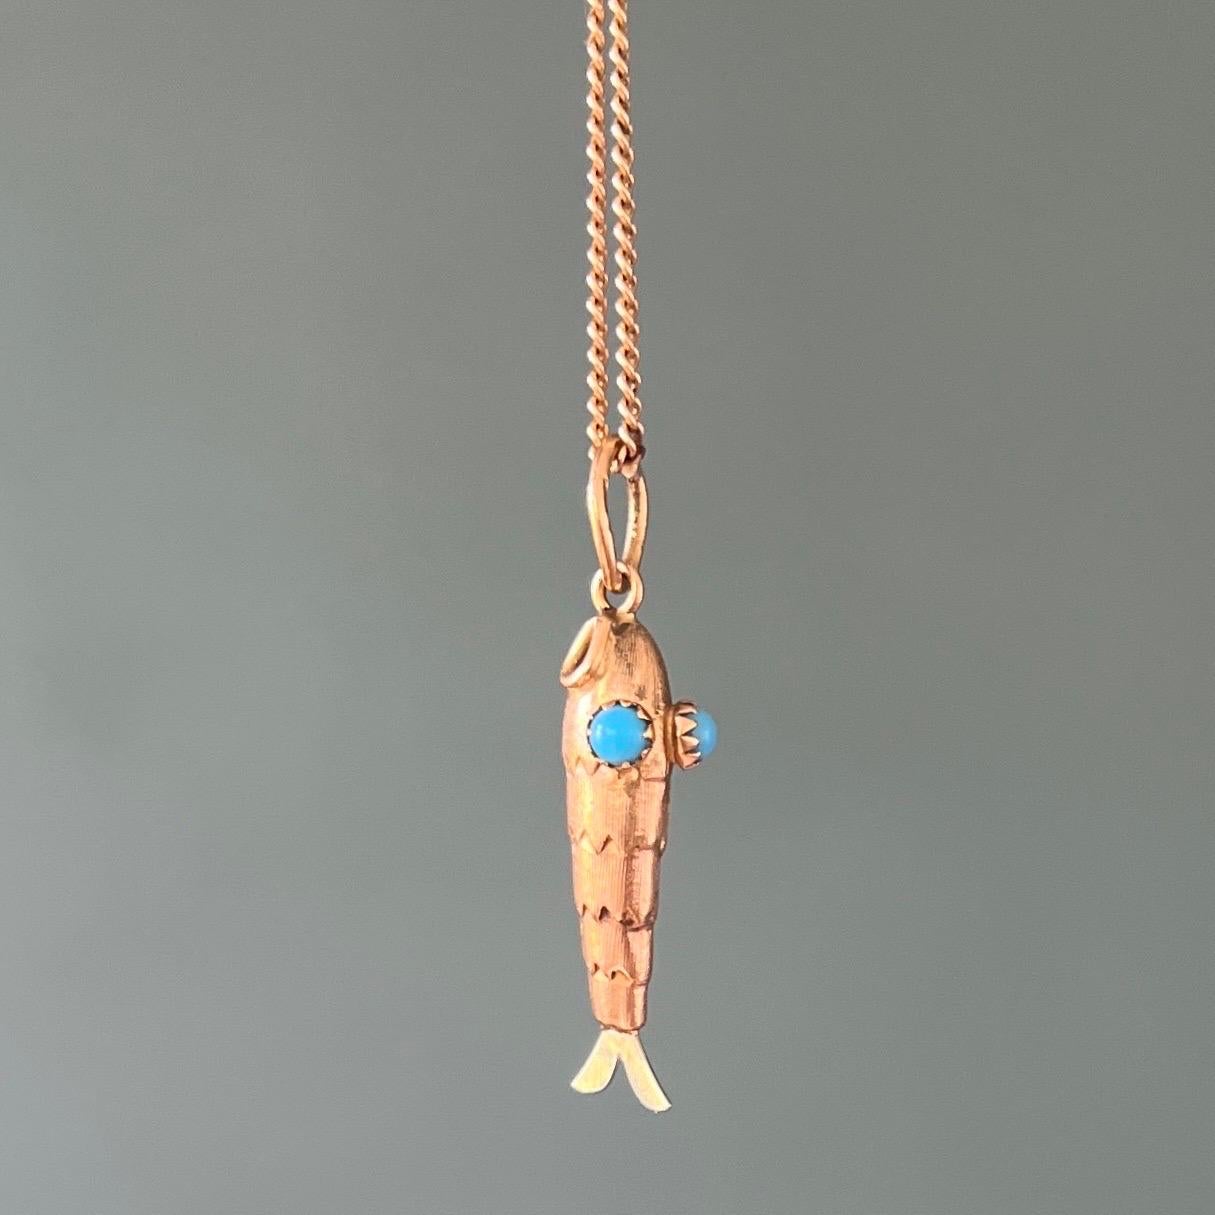 An 18 karat yellow gold vintage fish charm pendant. The fish is lovely and nicely created with turquoise stone eyes, the body is detailed with carving and raised work which resembles the scaly skin. The tail is fashioned in silver and the body of